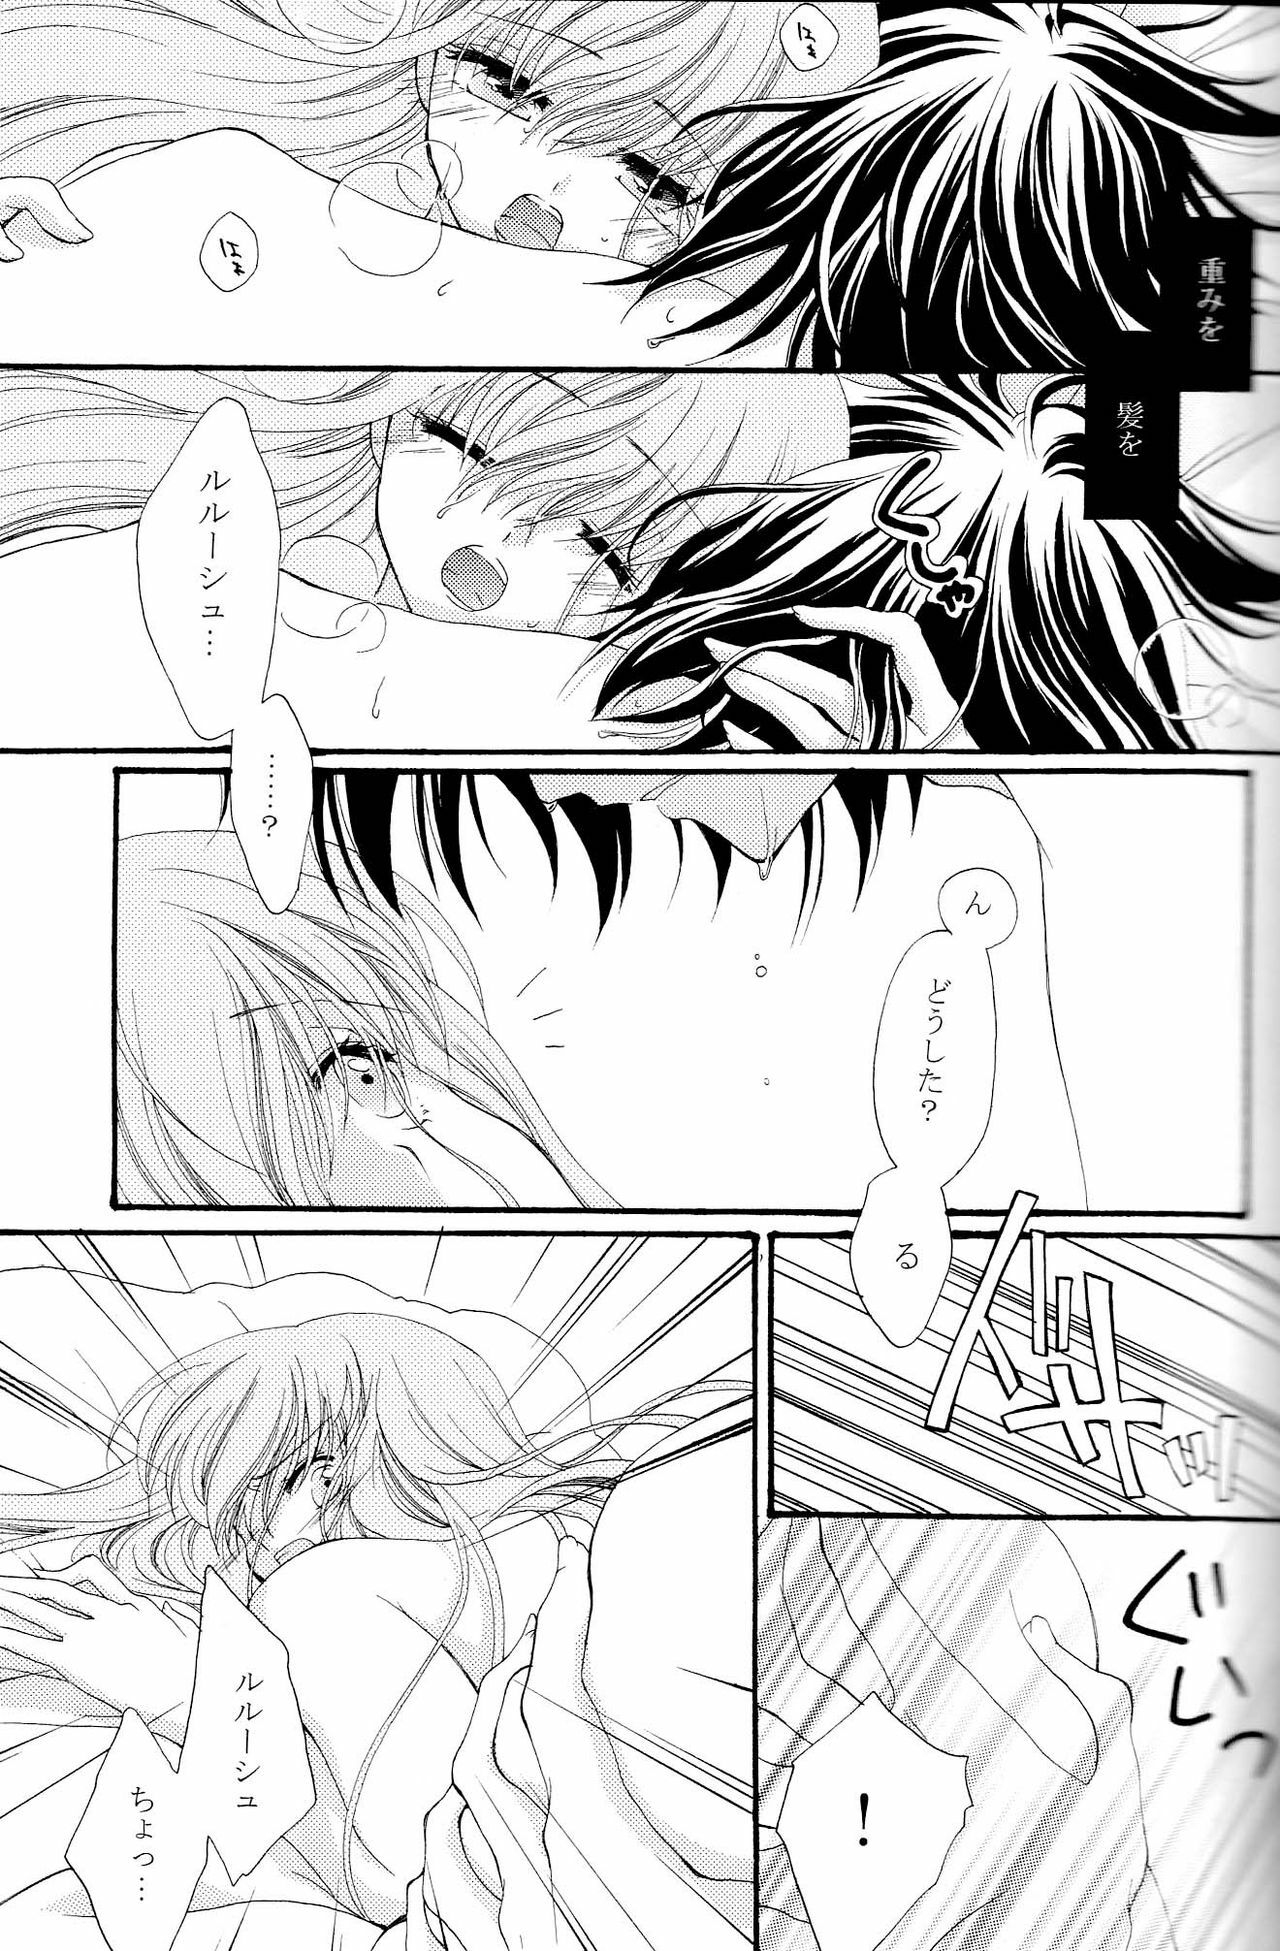 [APRICOT TEA] The last love letter presented to my dear only partner. (Code Geass) page 14 full